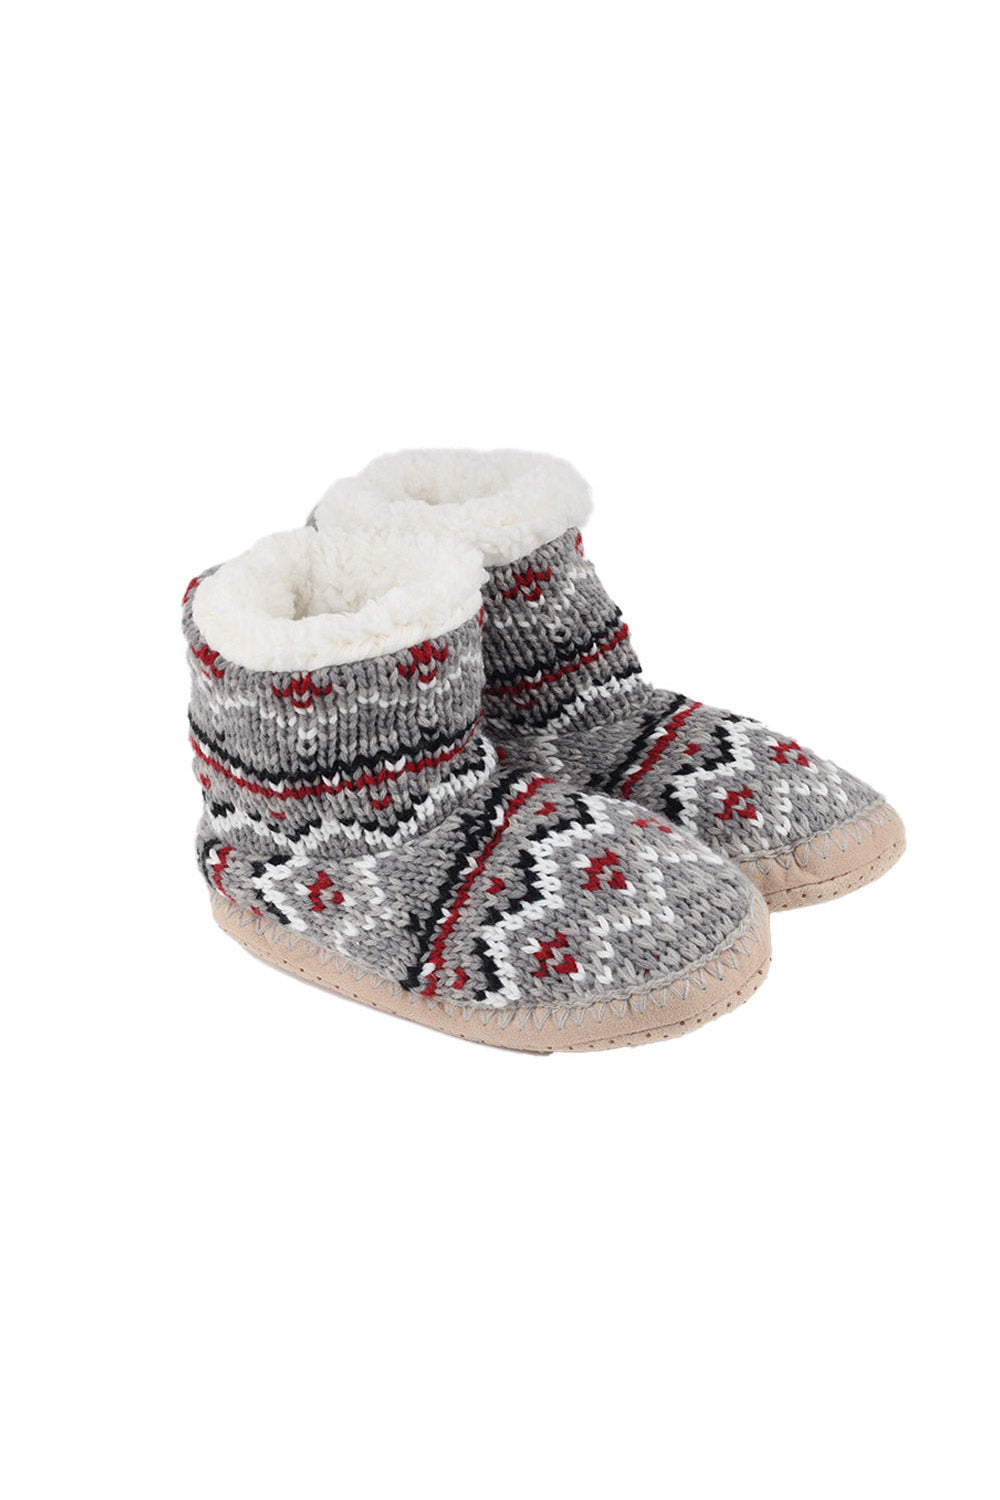 Knitted home booties with soft, fuzzy lining and non-slip sole. Machine washable and dryer safe.